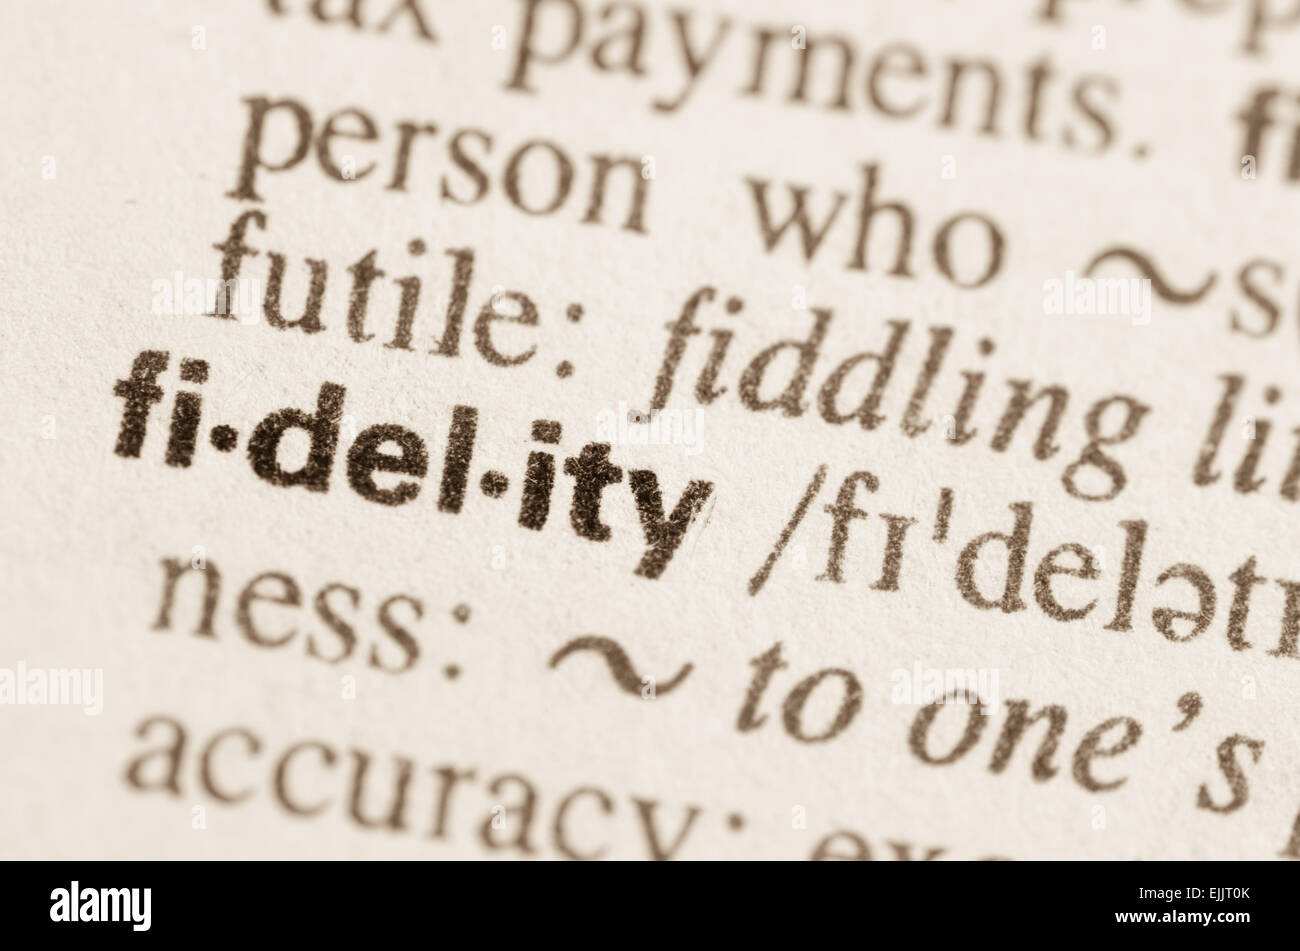 Definition of word fidelity in dictionary Stock Photo